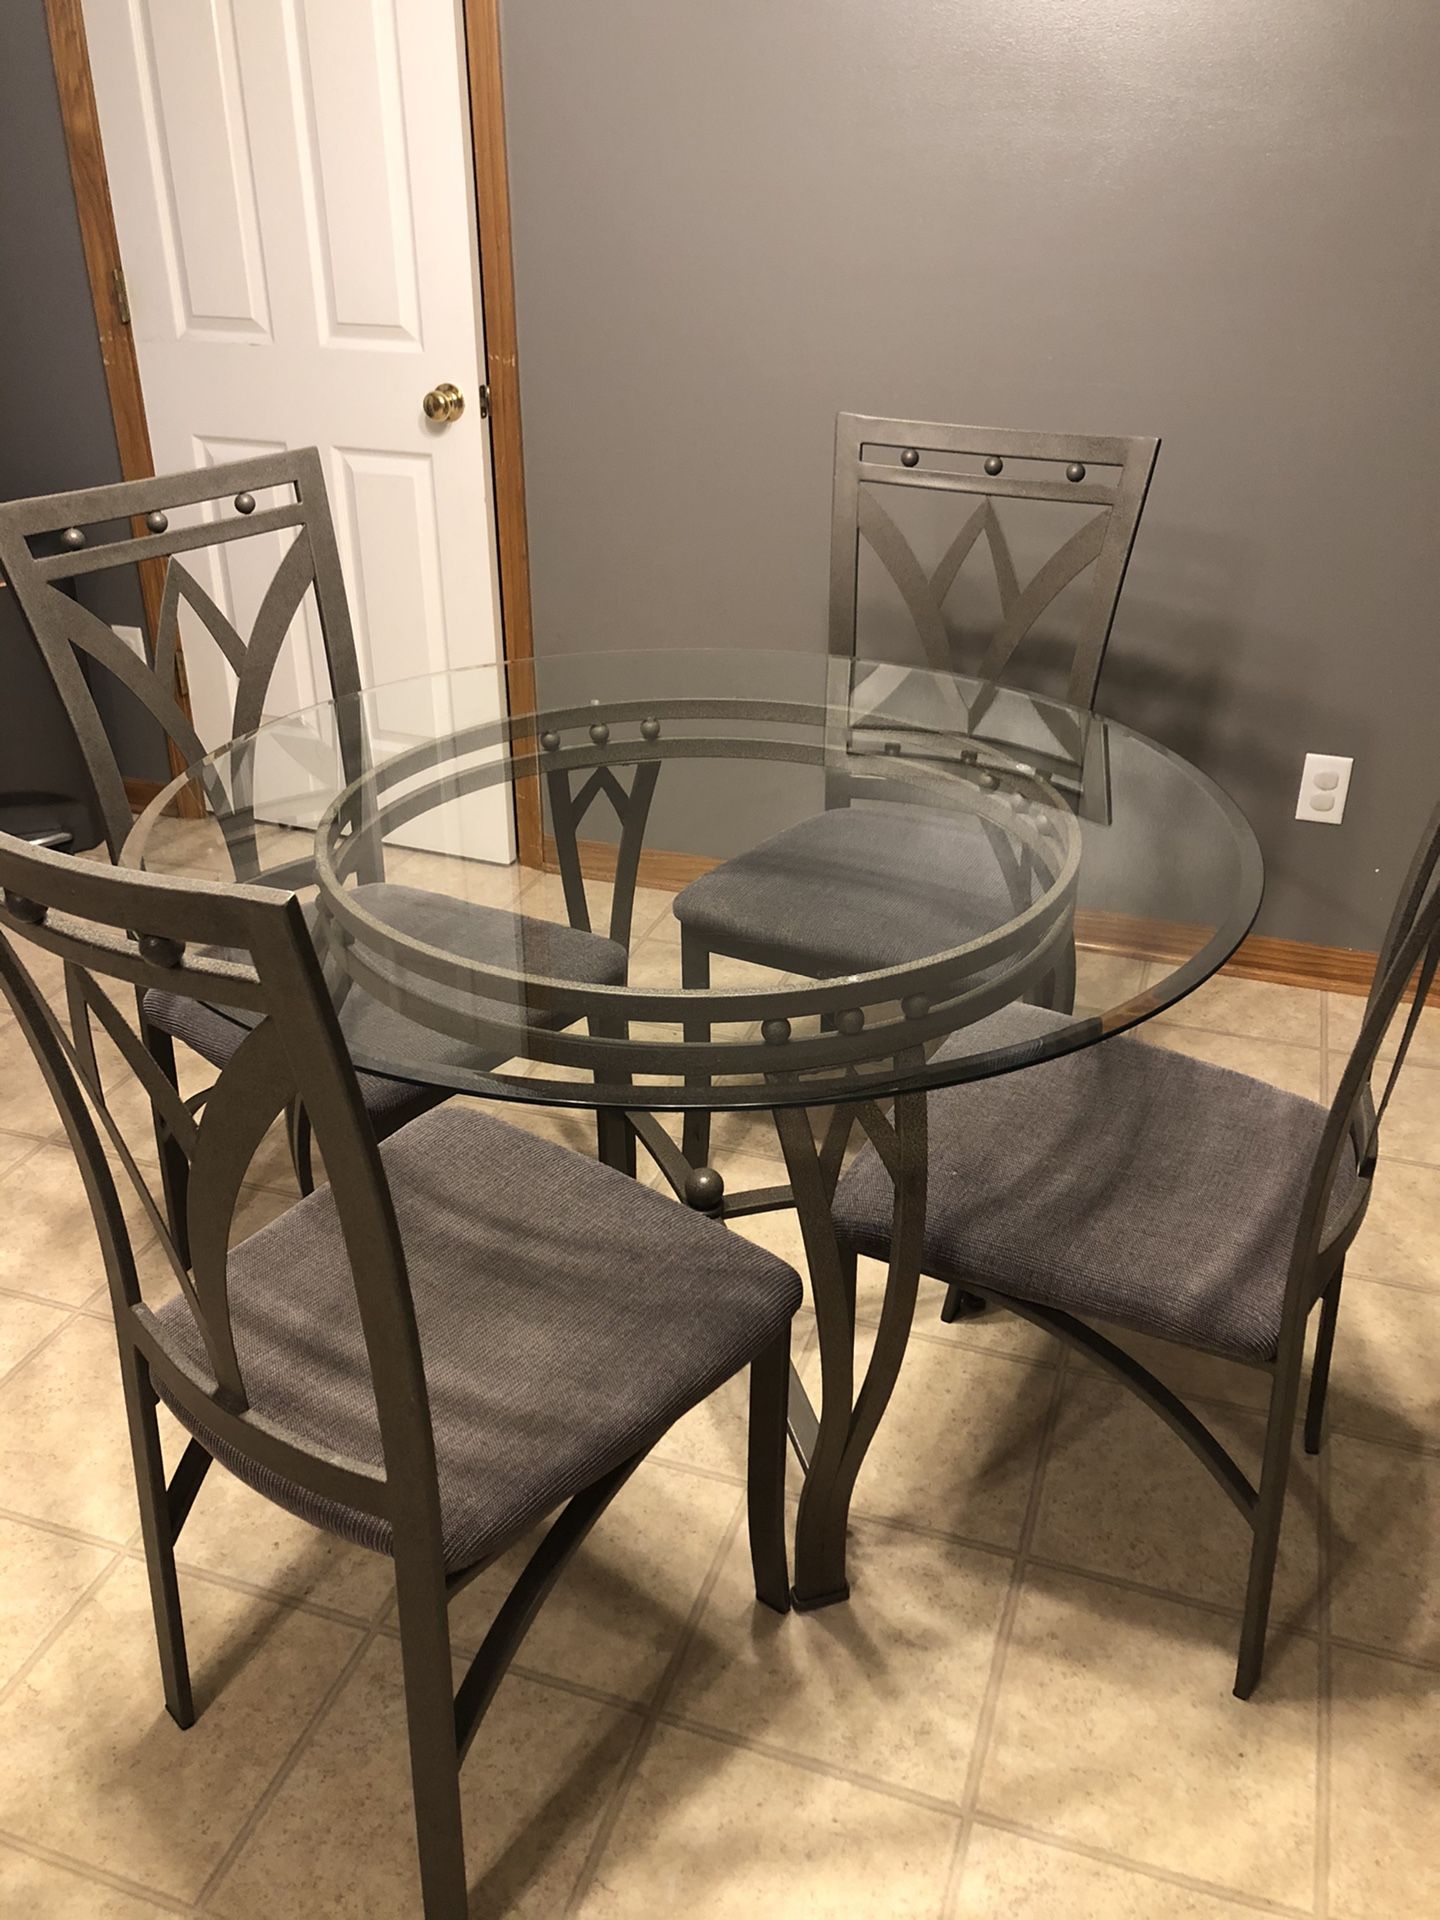 Circular Glass Kitchen Table and Chairs